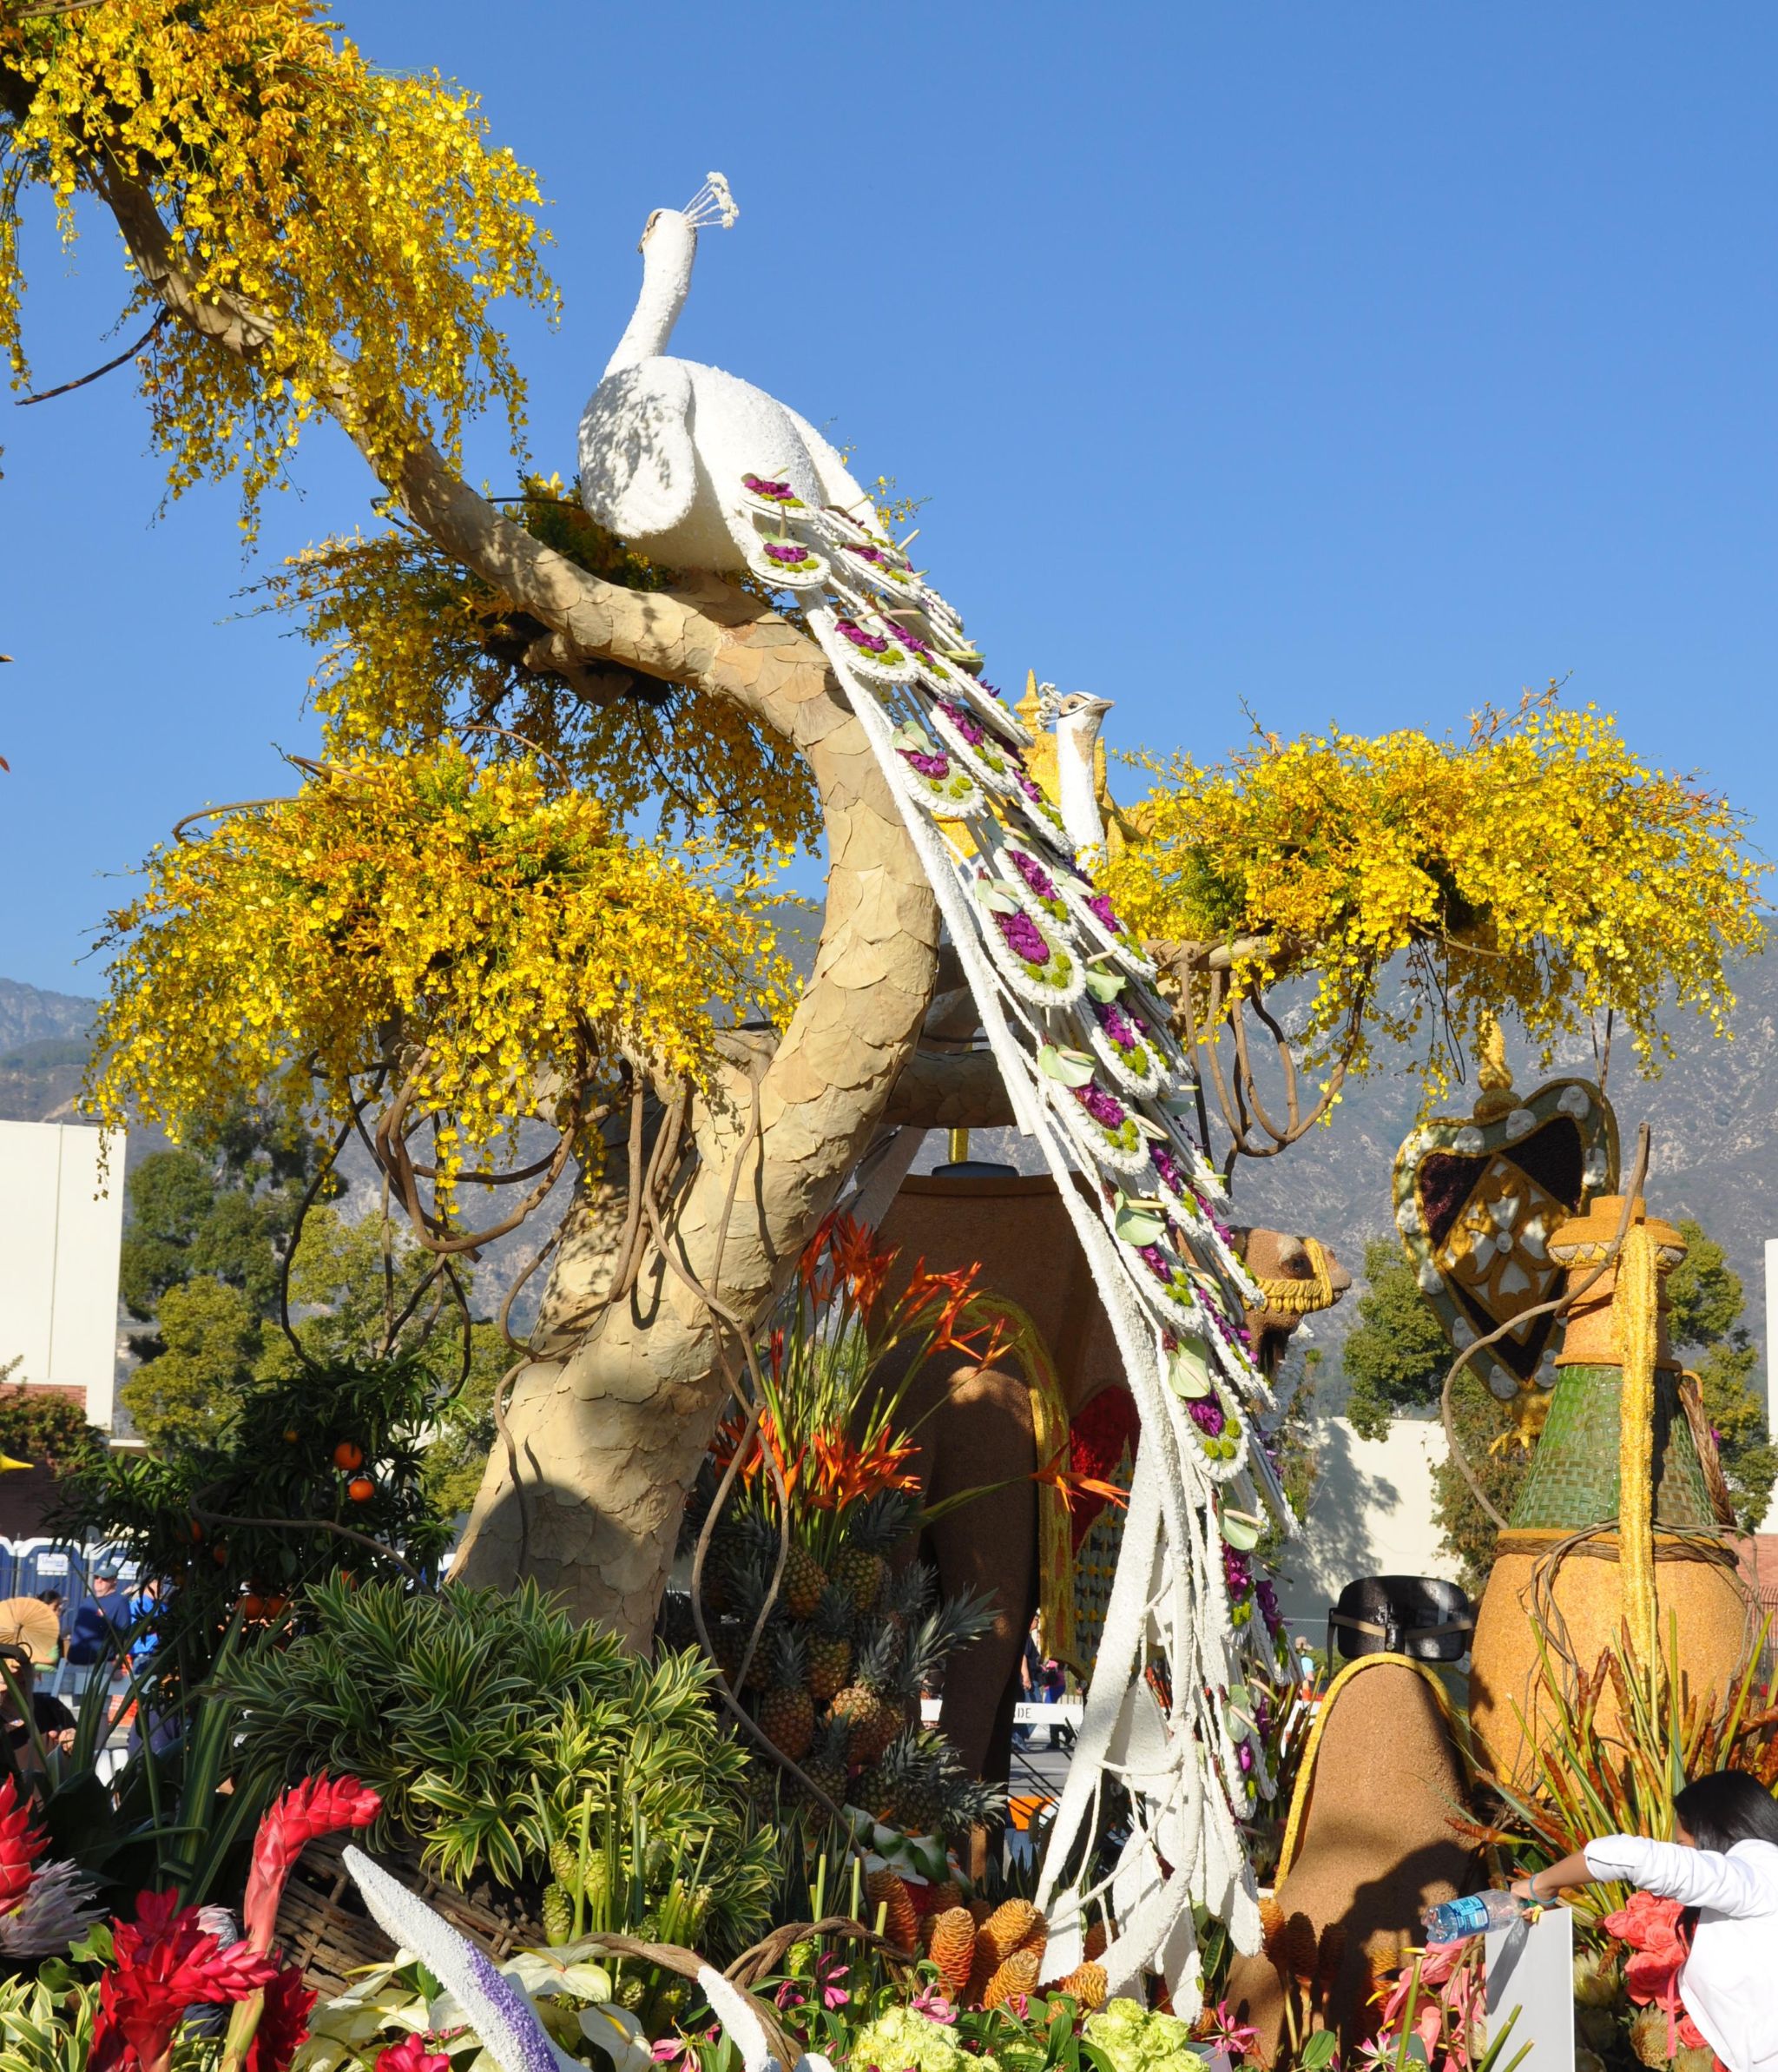 Dole Packaged Foods - Sunrise at the Oasis (d), Tournament of Roses Parade Showcase, Pasadena, CA - 2014-01-01